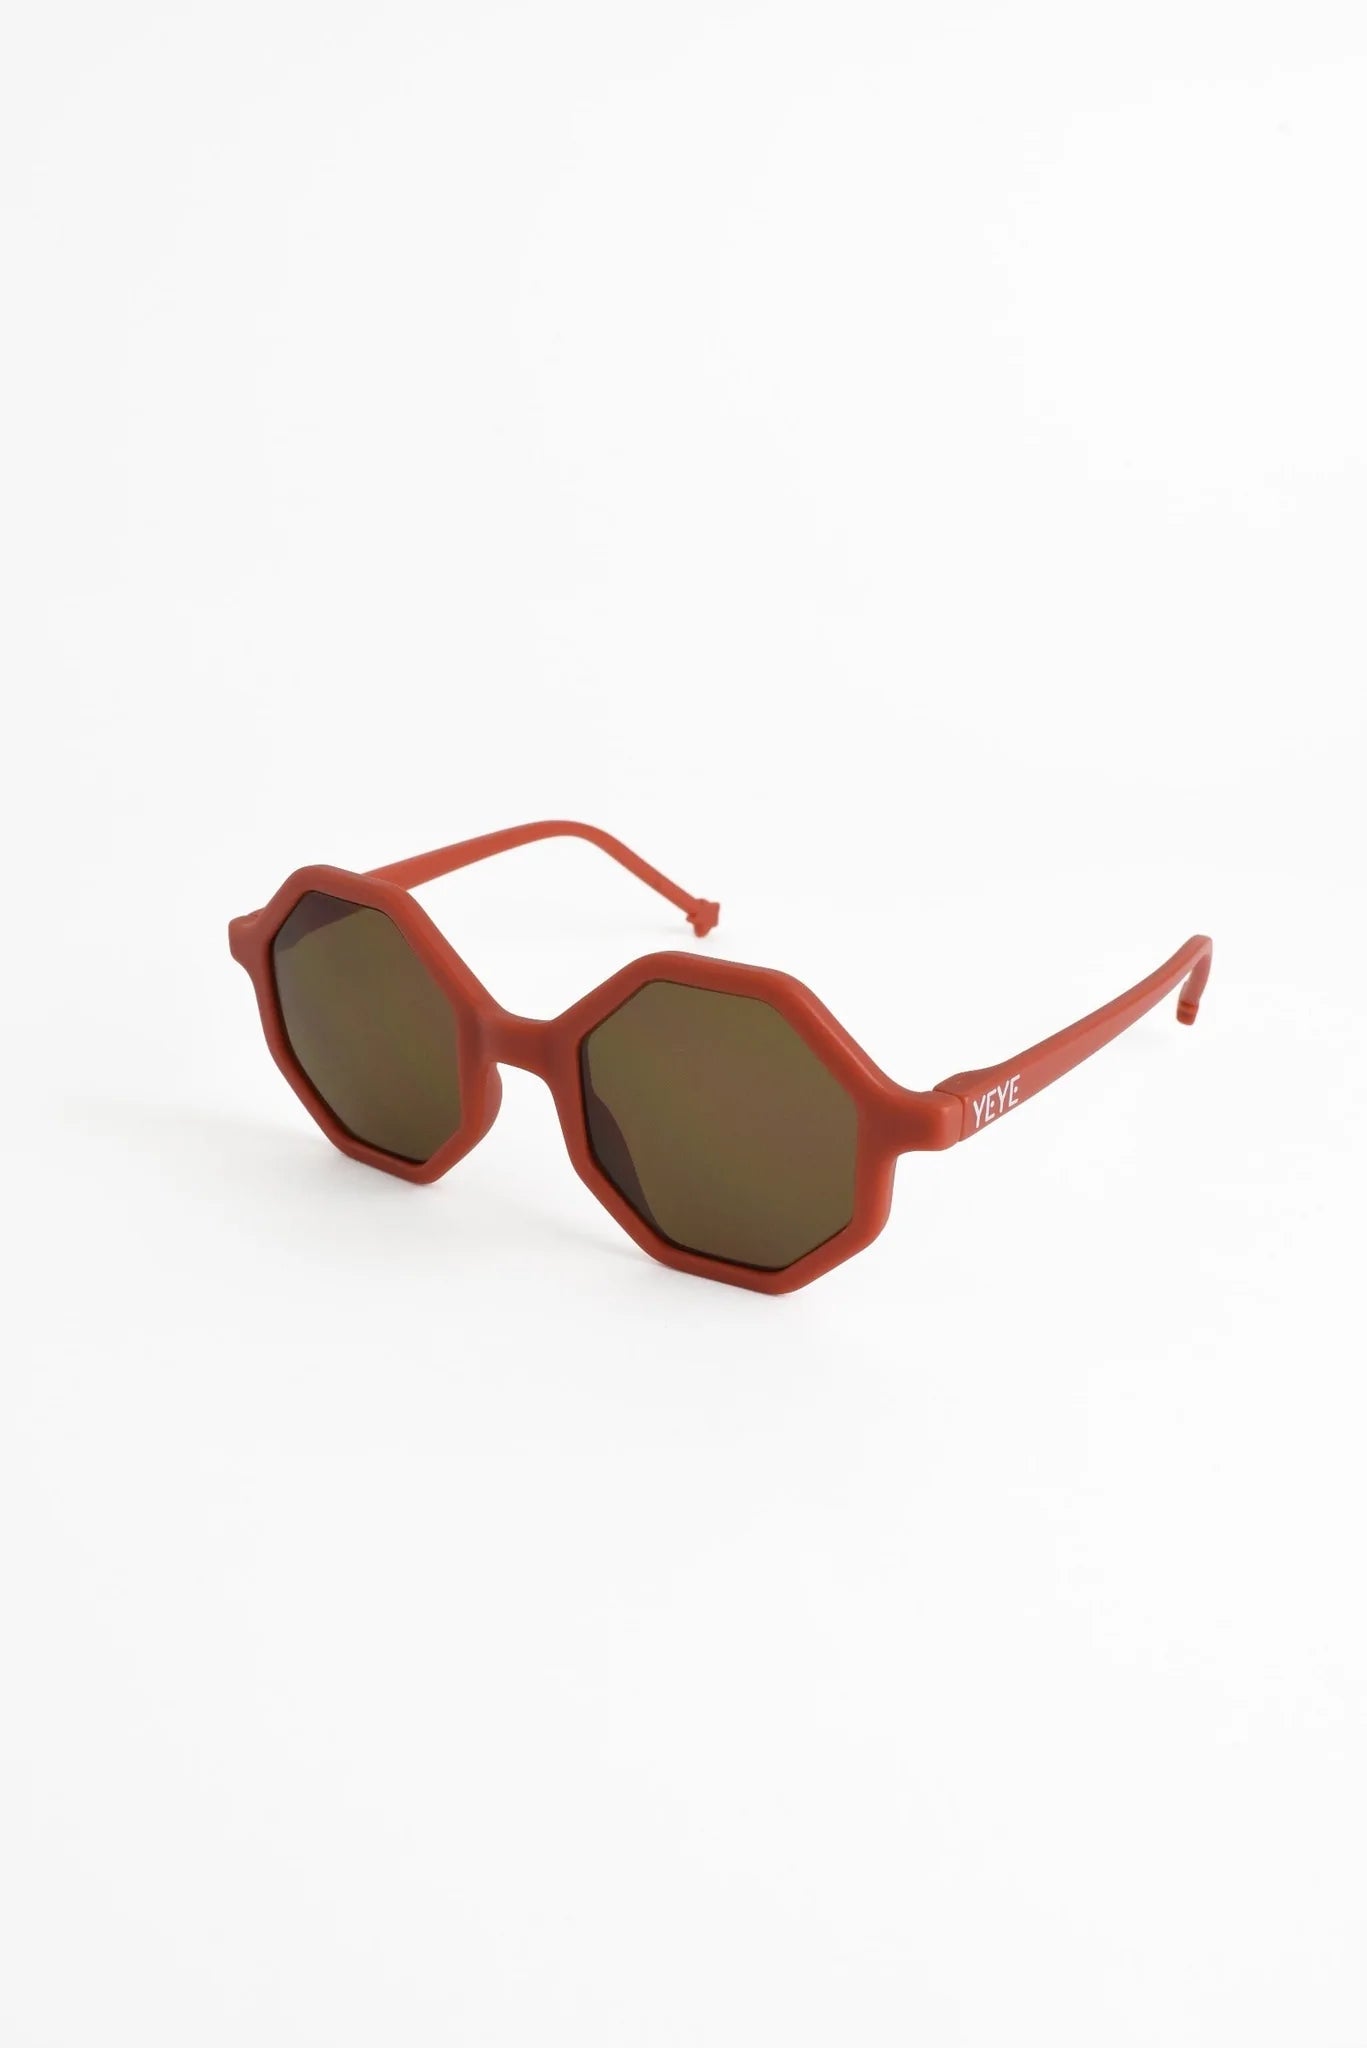 Sunglasses 2 to 8 years old - Terracotta